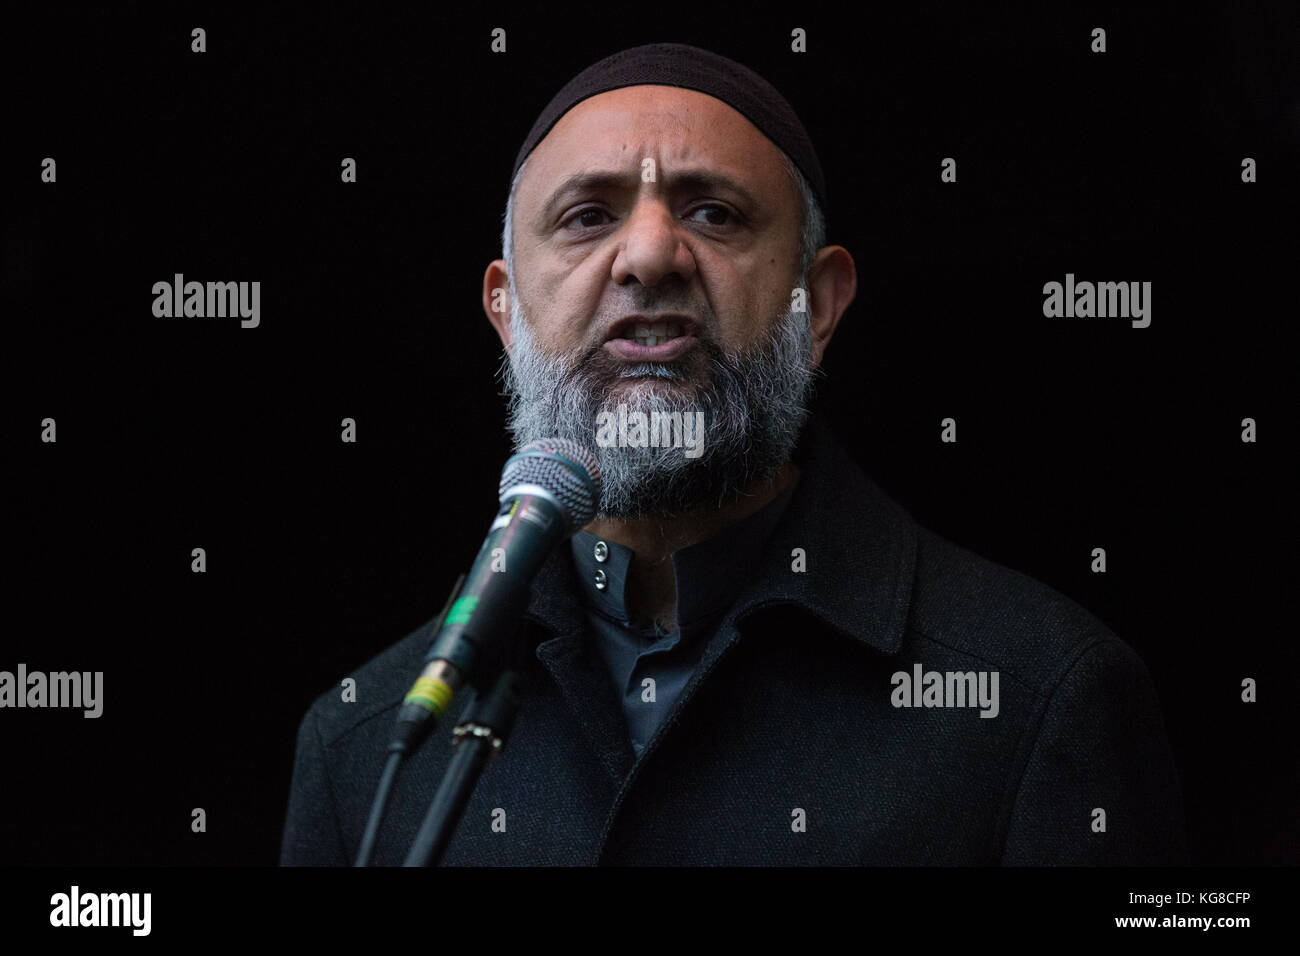 London, UK. 4th November, 2017. Ismail Patel, Chair of Friends of al-Aqsa, addresses campaigners for Palestine who marched through London to demand justice and equal rights for Palestinians two days after the 100th anniversary of the Balfour Declaration on 2nd November 1917. Credit: Mark Kerrison/Alamy Live News Stock Photo